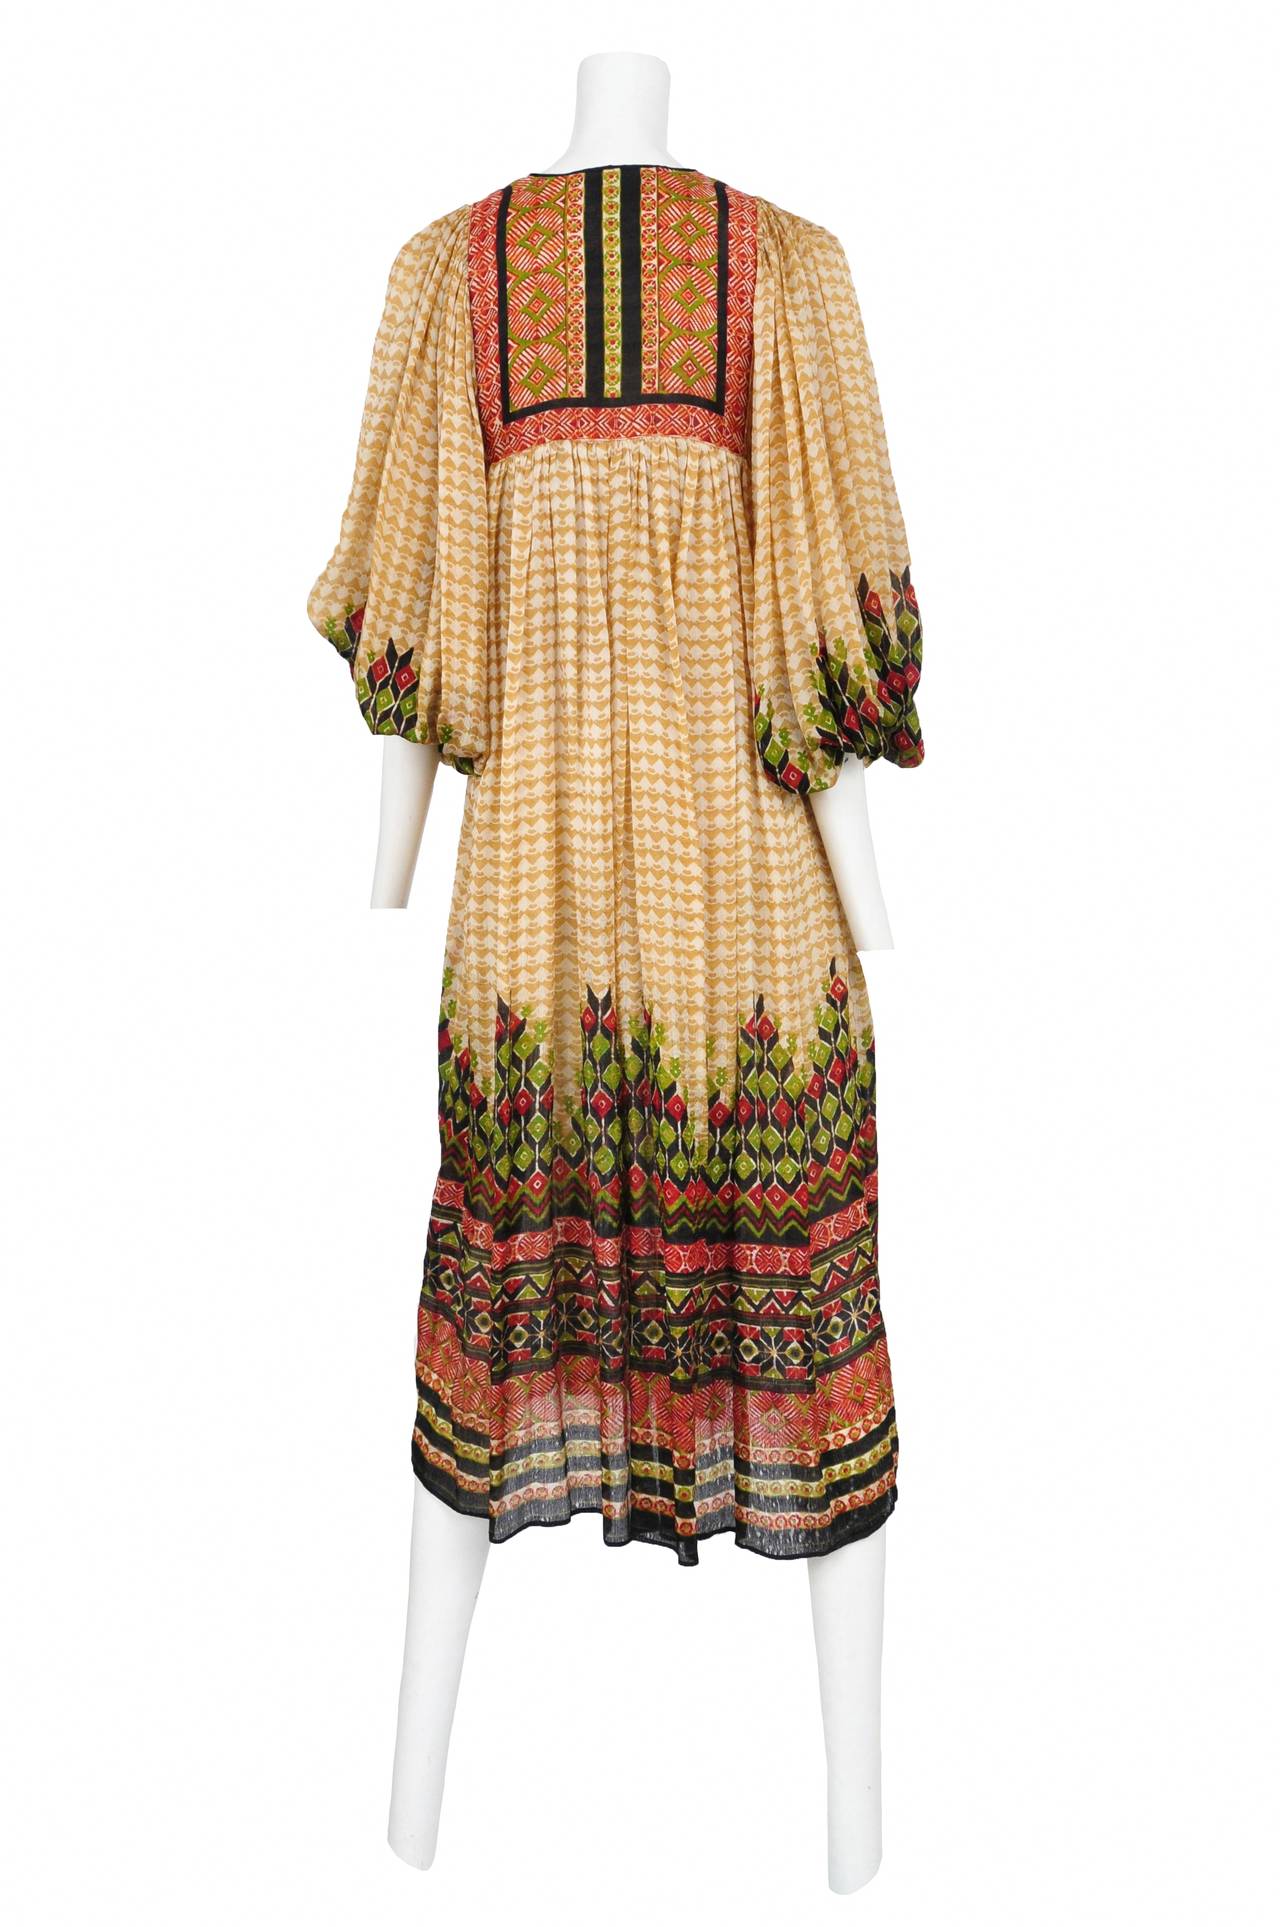 Vintage Judith Ann tan, green and rust silk bohemian print dress with traditional peasant sleeves, slit front printed square yoke and beaded ties at the collar that are capped off with faux horn pendants.